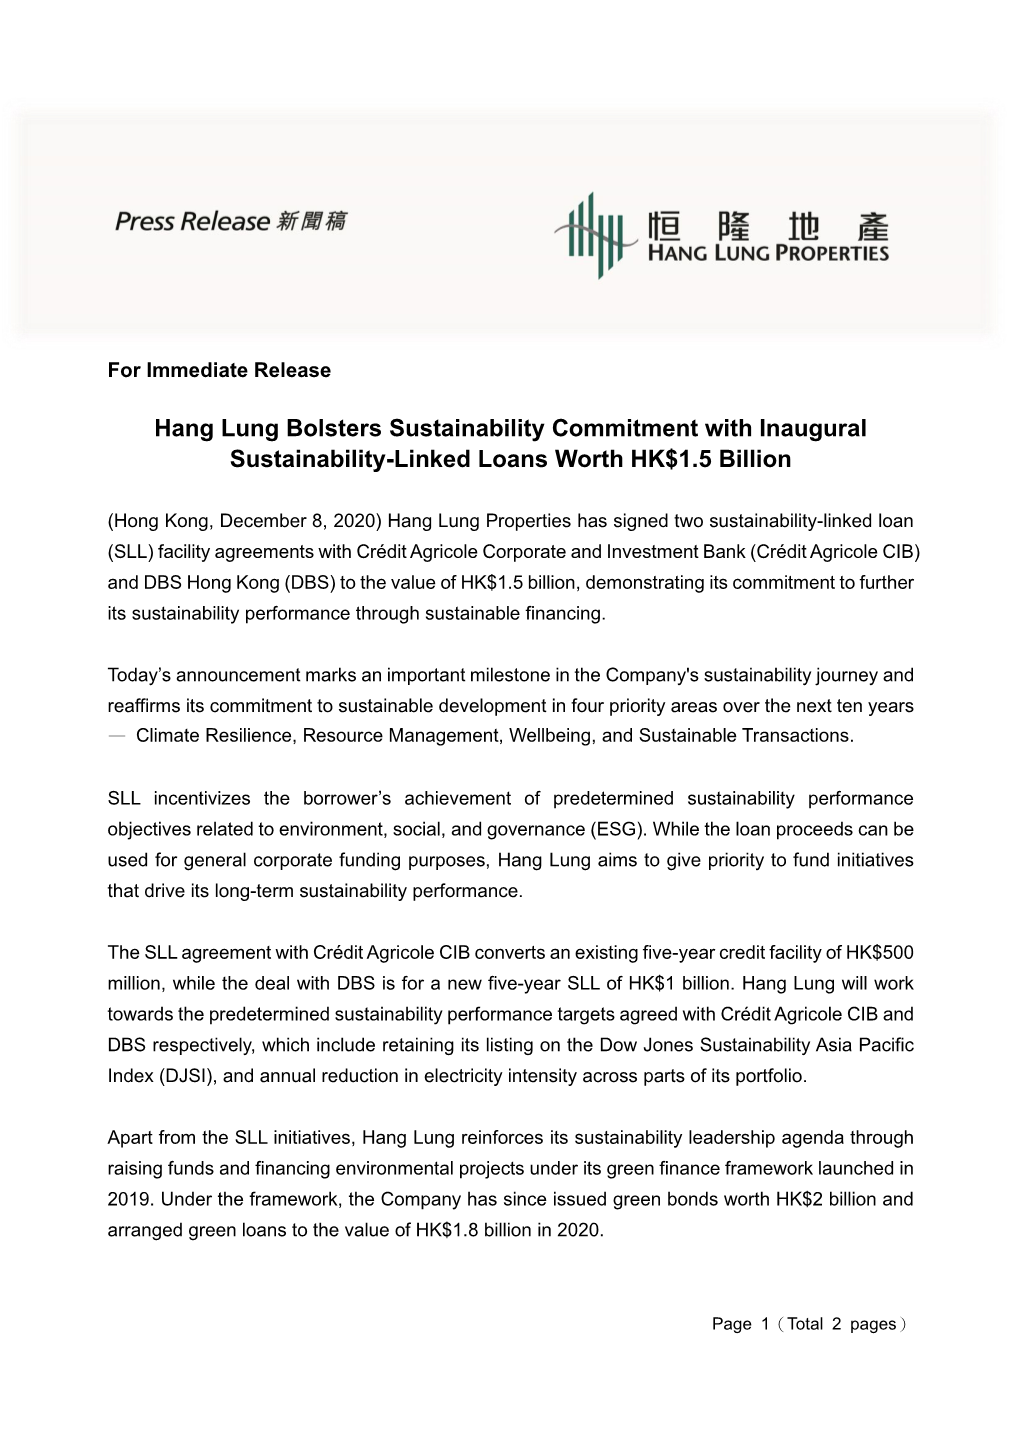 Hang Lung Bolsters Sustainability Commitment with Inaugural Sustainability-Linked Loans Worth HK$1.5 Billion